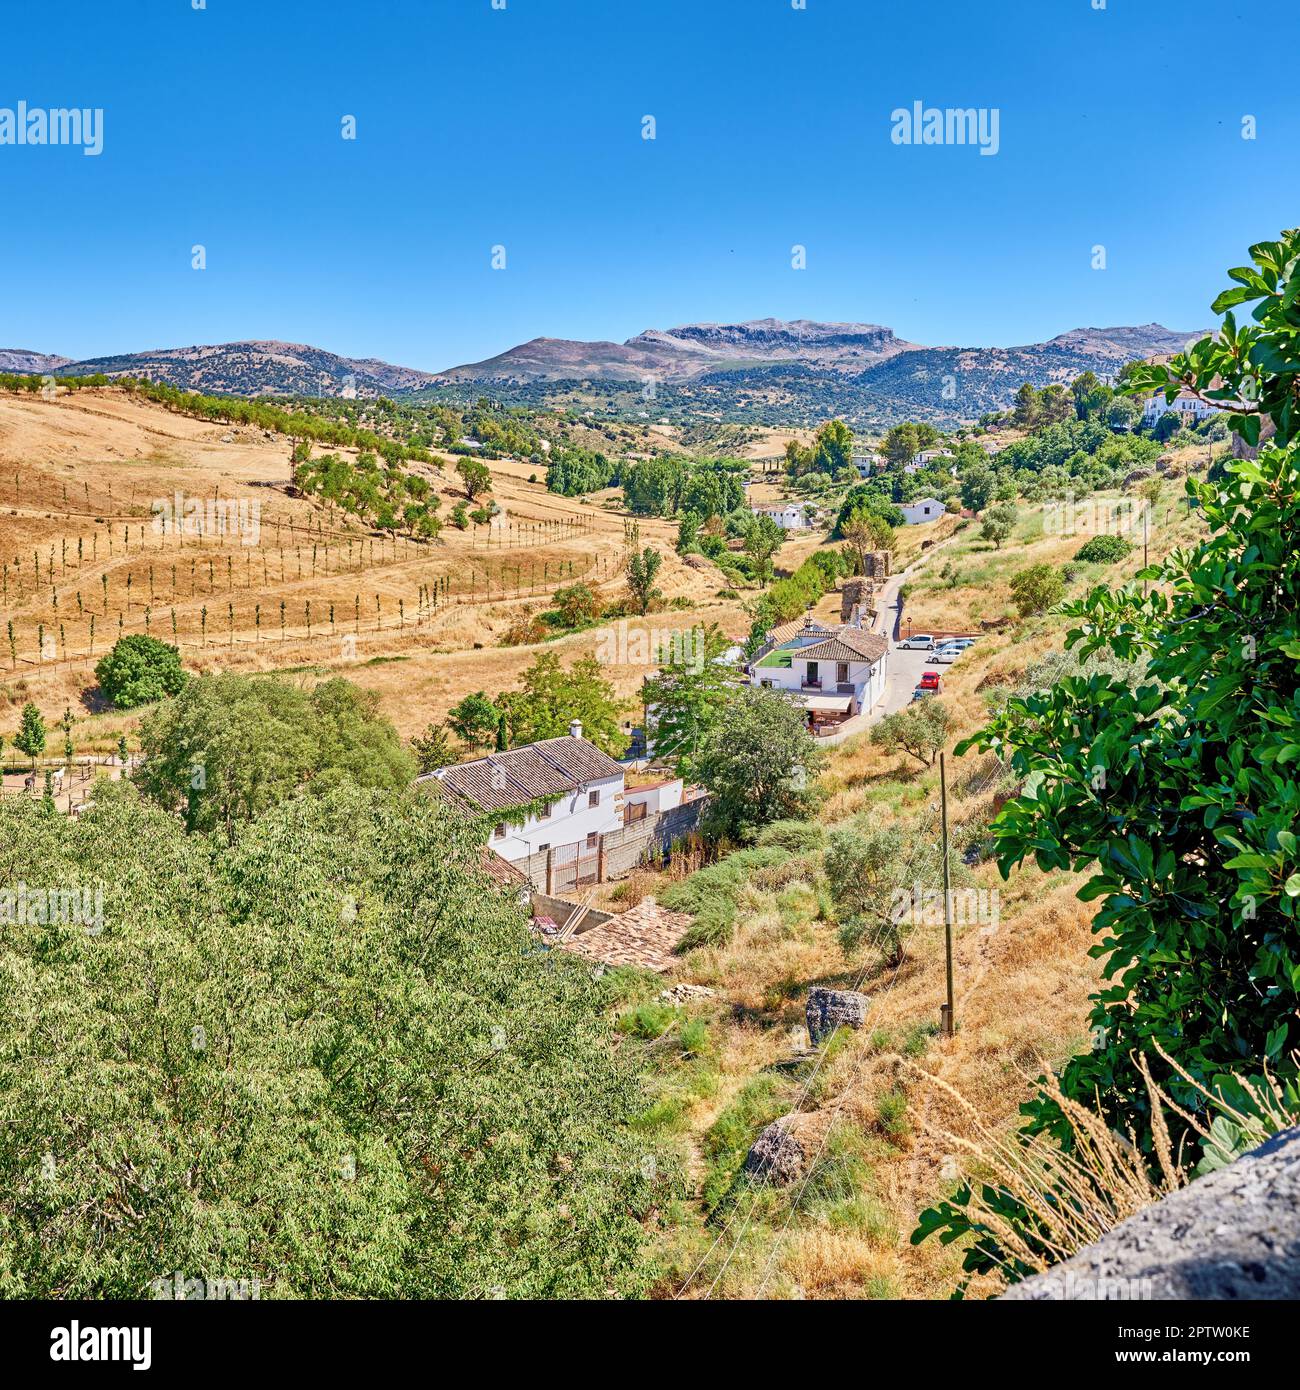 Ronda - the ancient city of Ronda, Andalusia. The beautiful ancient city of Ronda, Andalusia, Spain Stock Photo